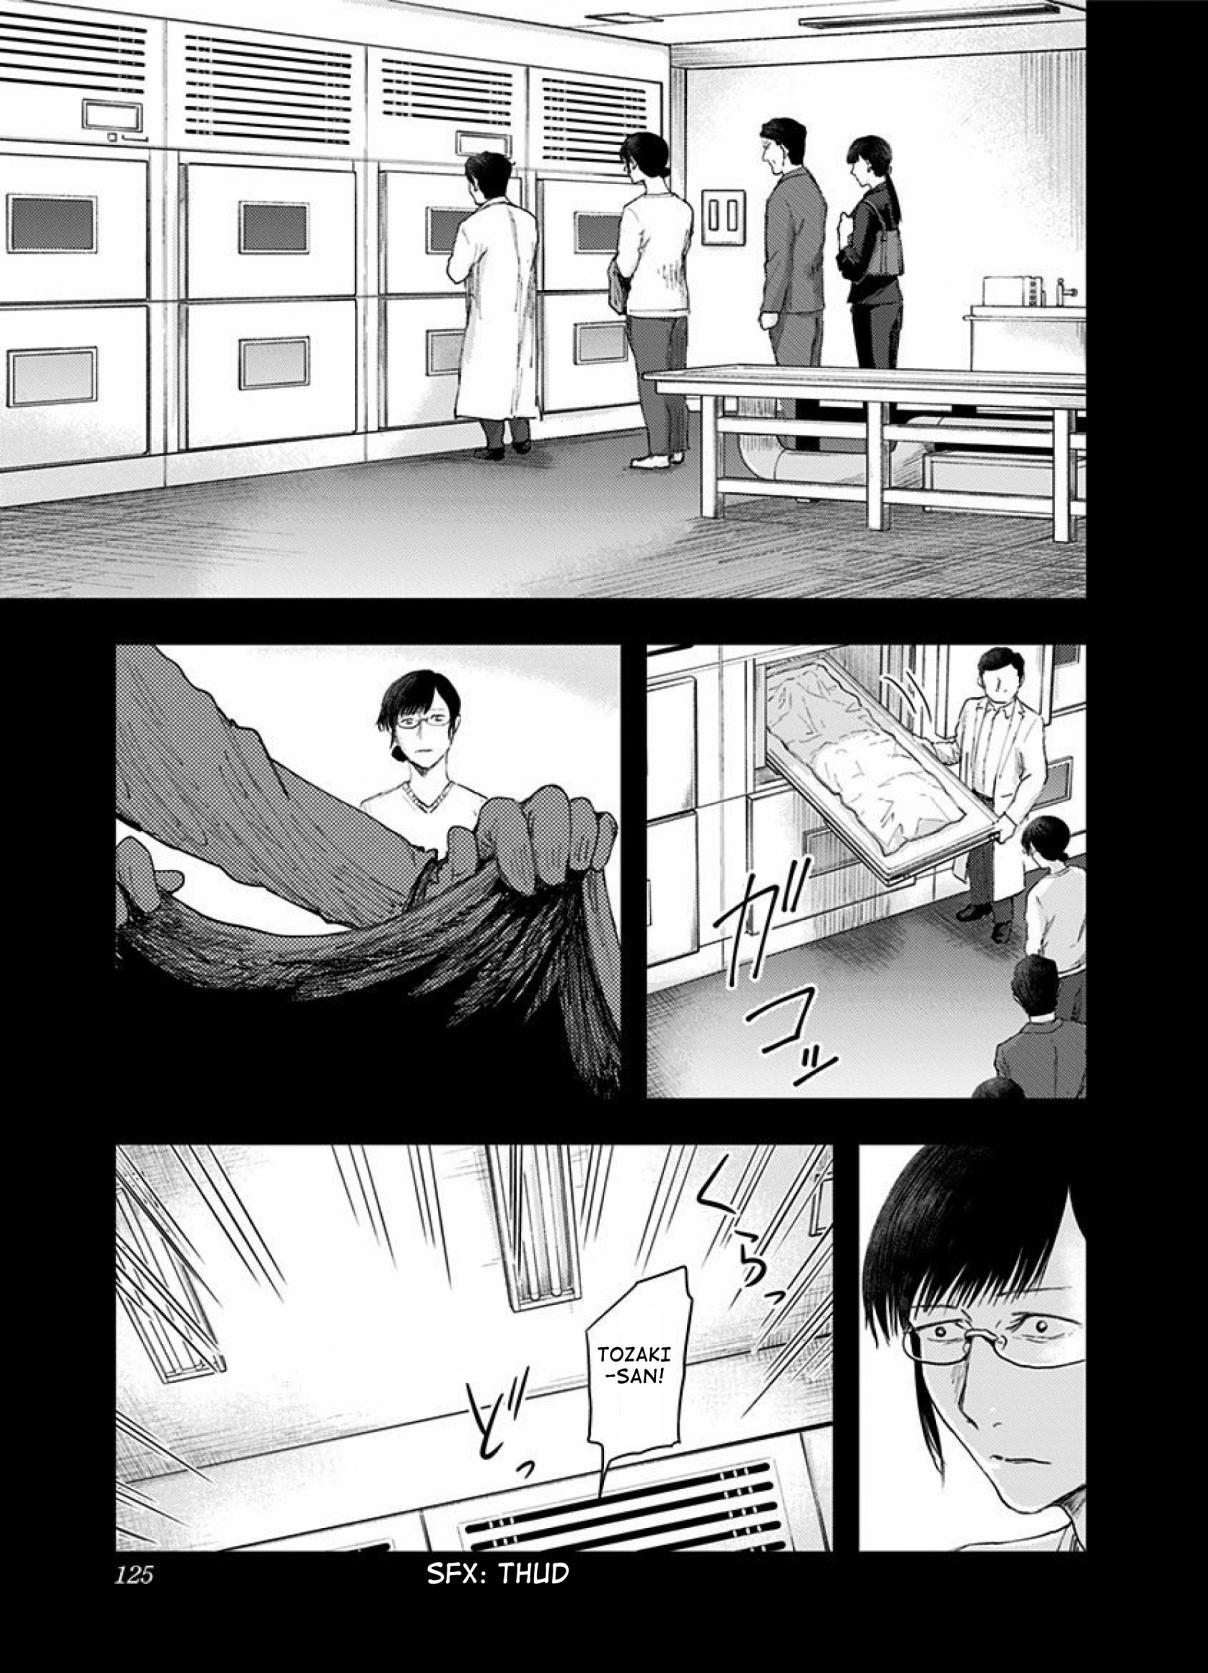 Route End Vol. 7 Ch. 46 The Victims